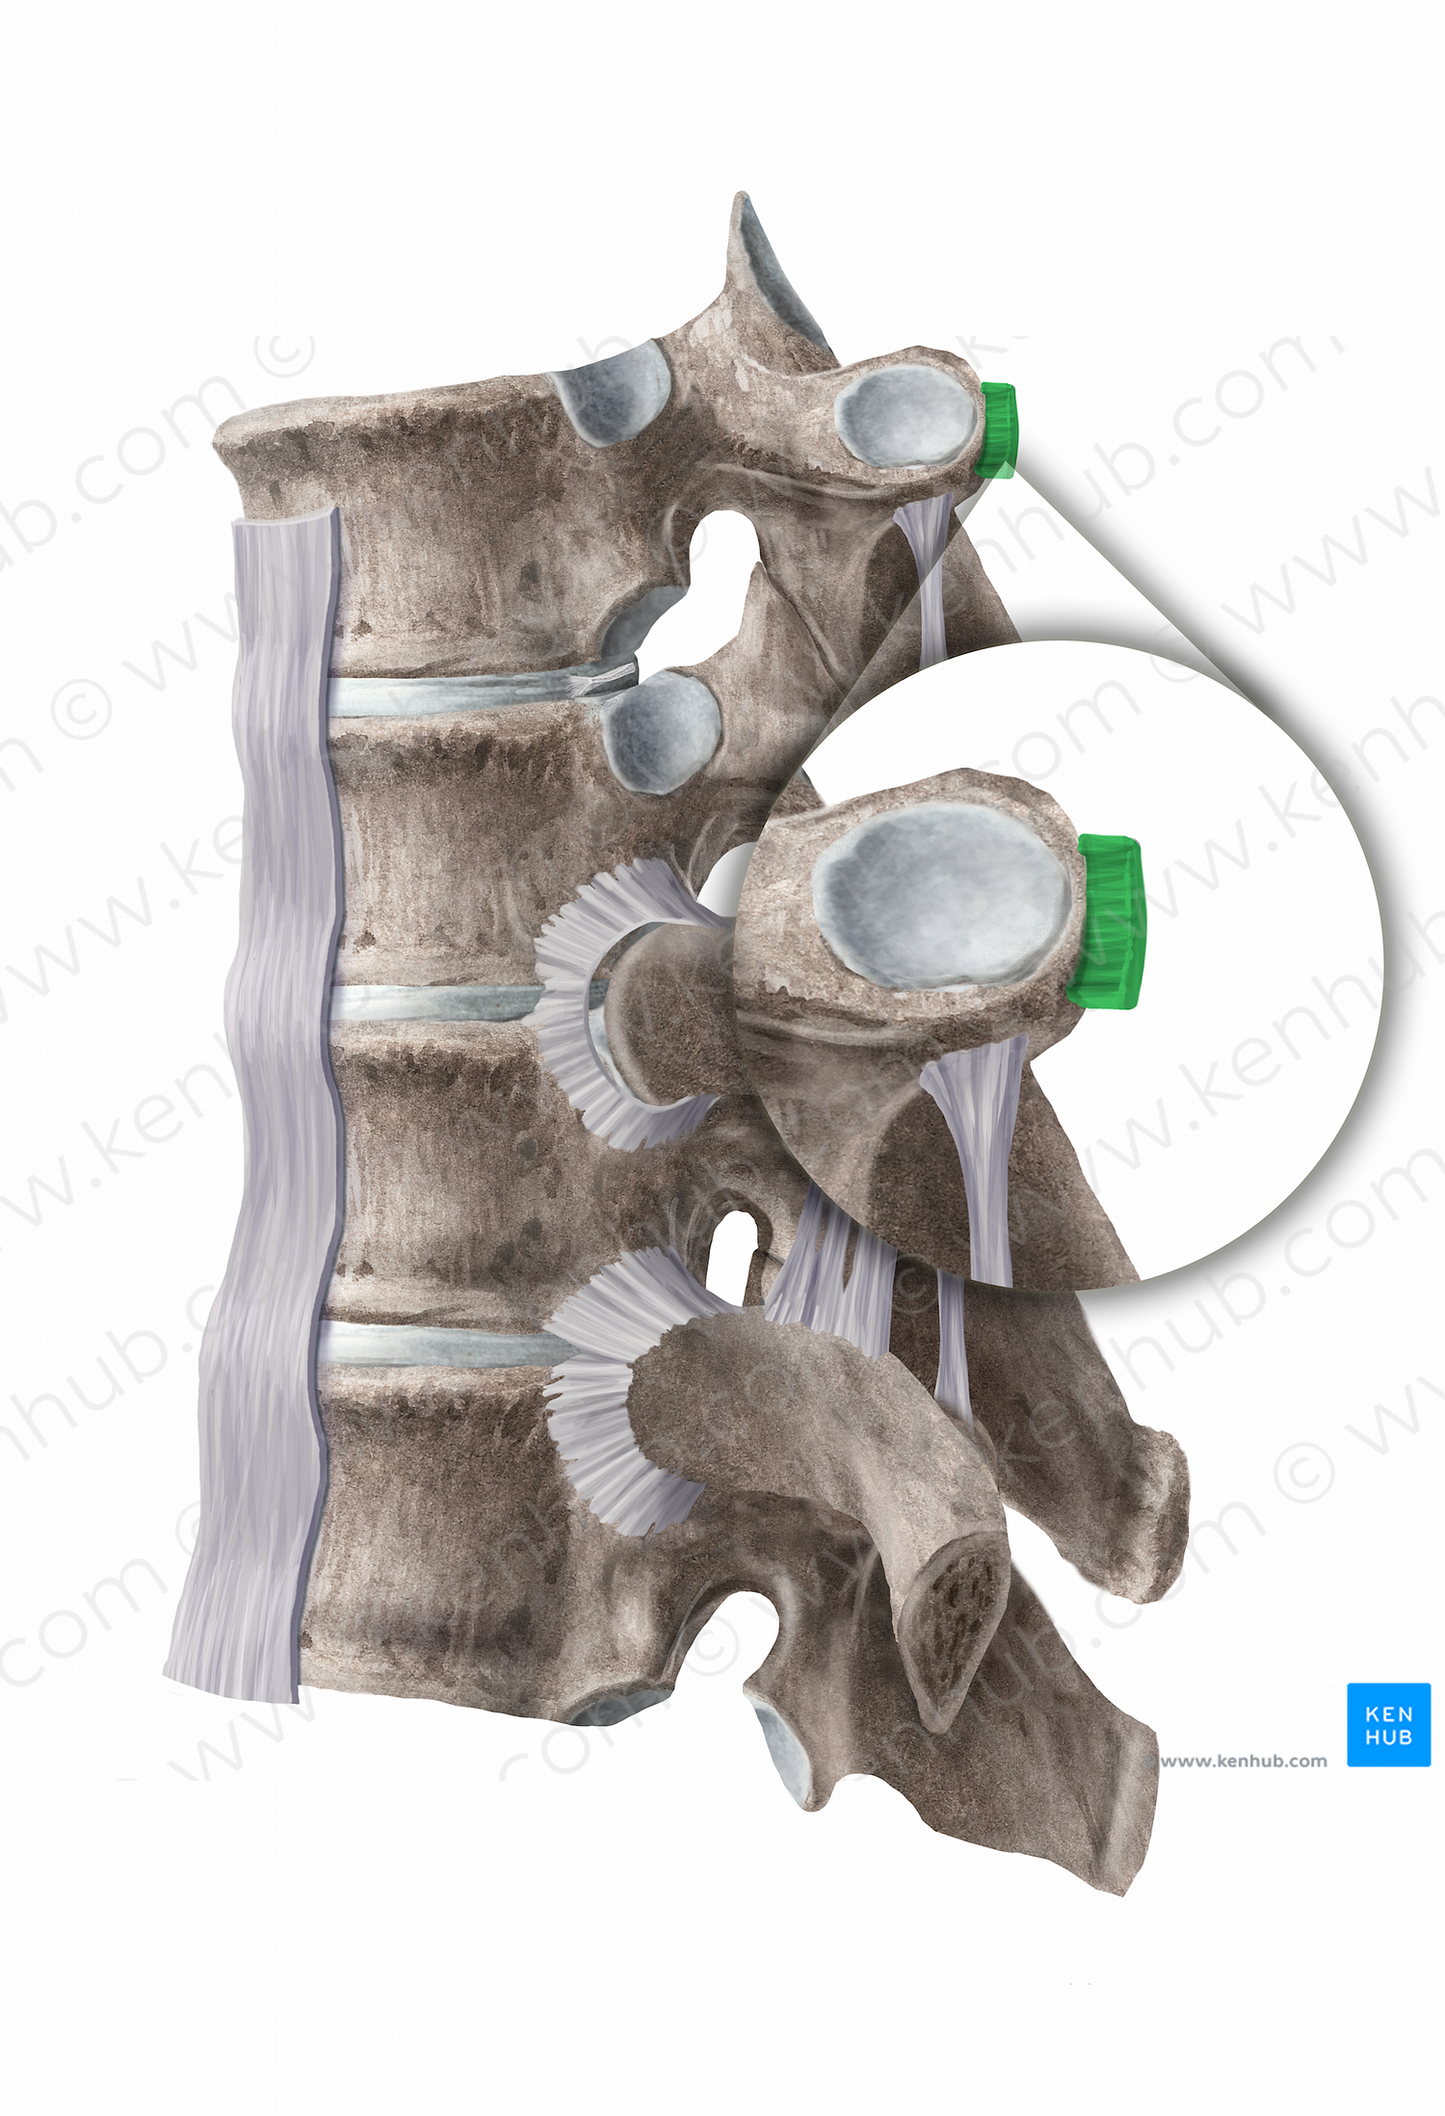 Lateral costotransverse ligament (#11269)